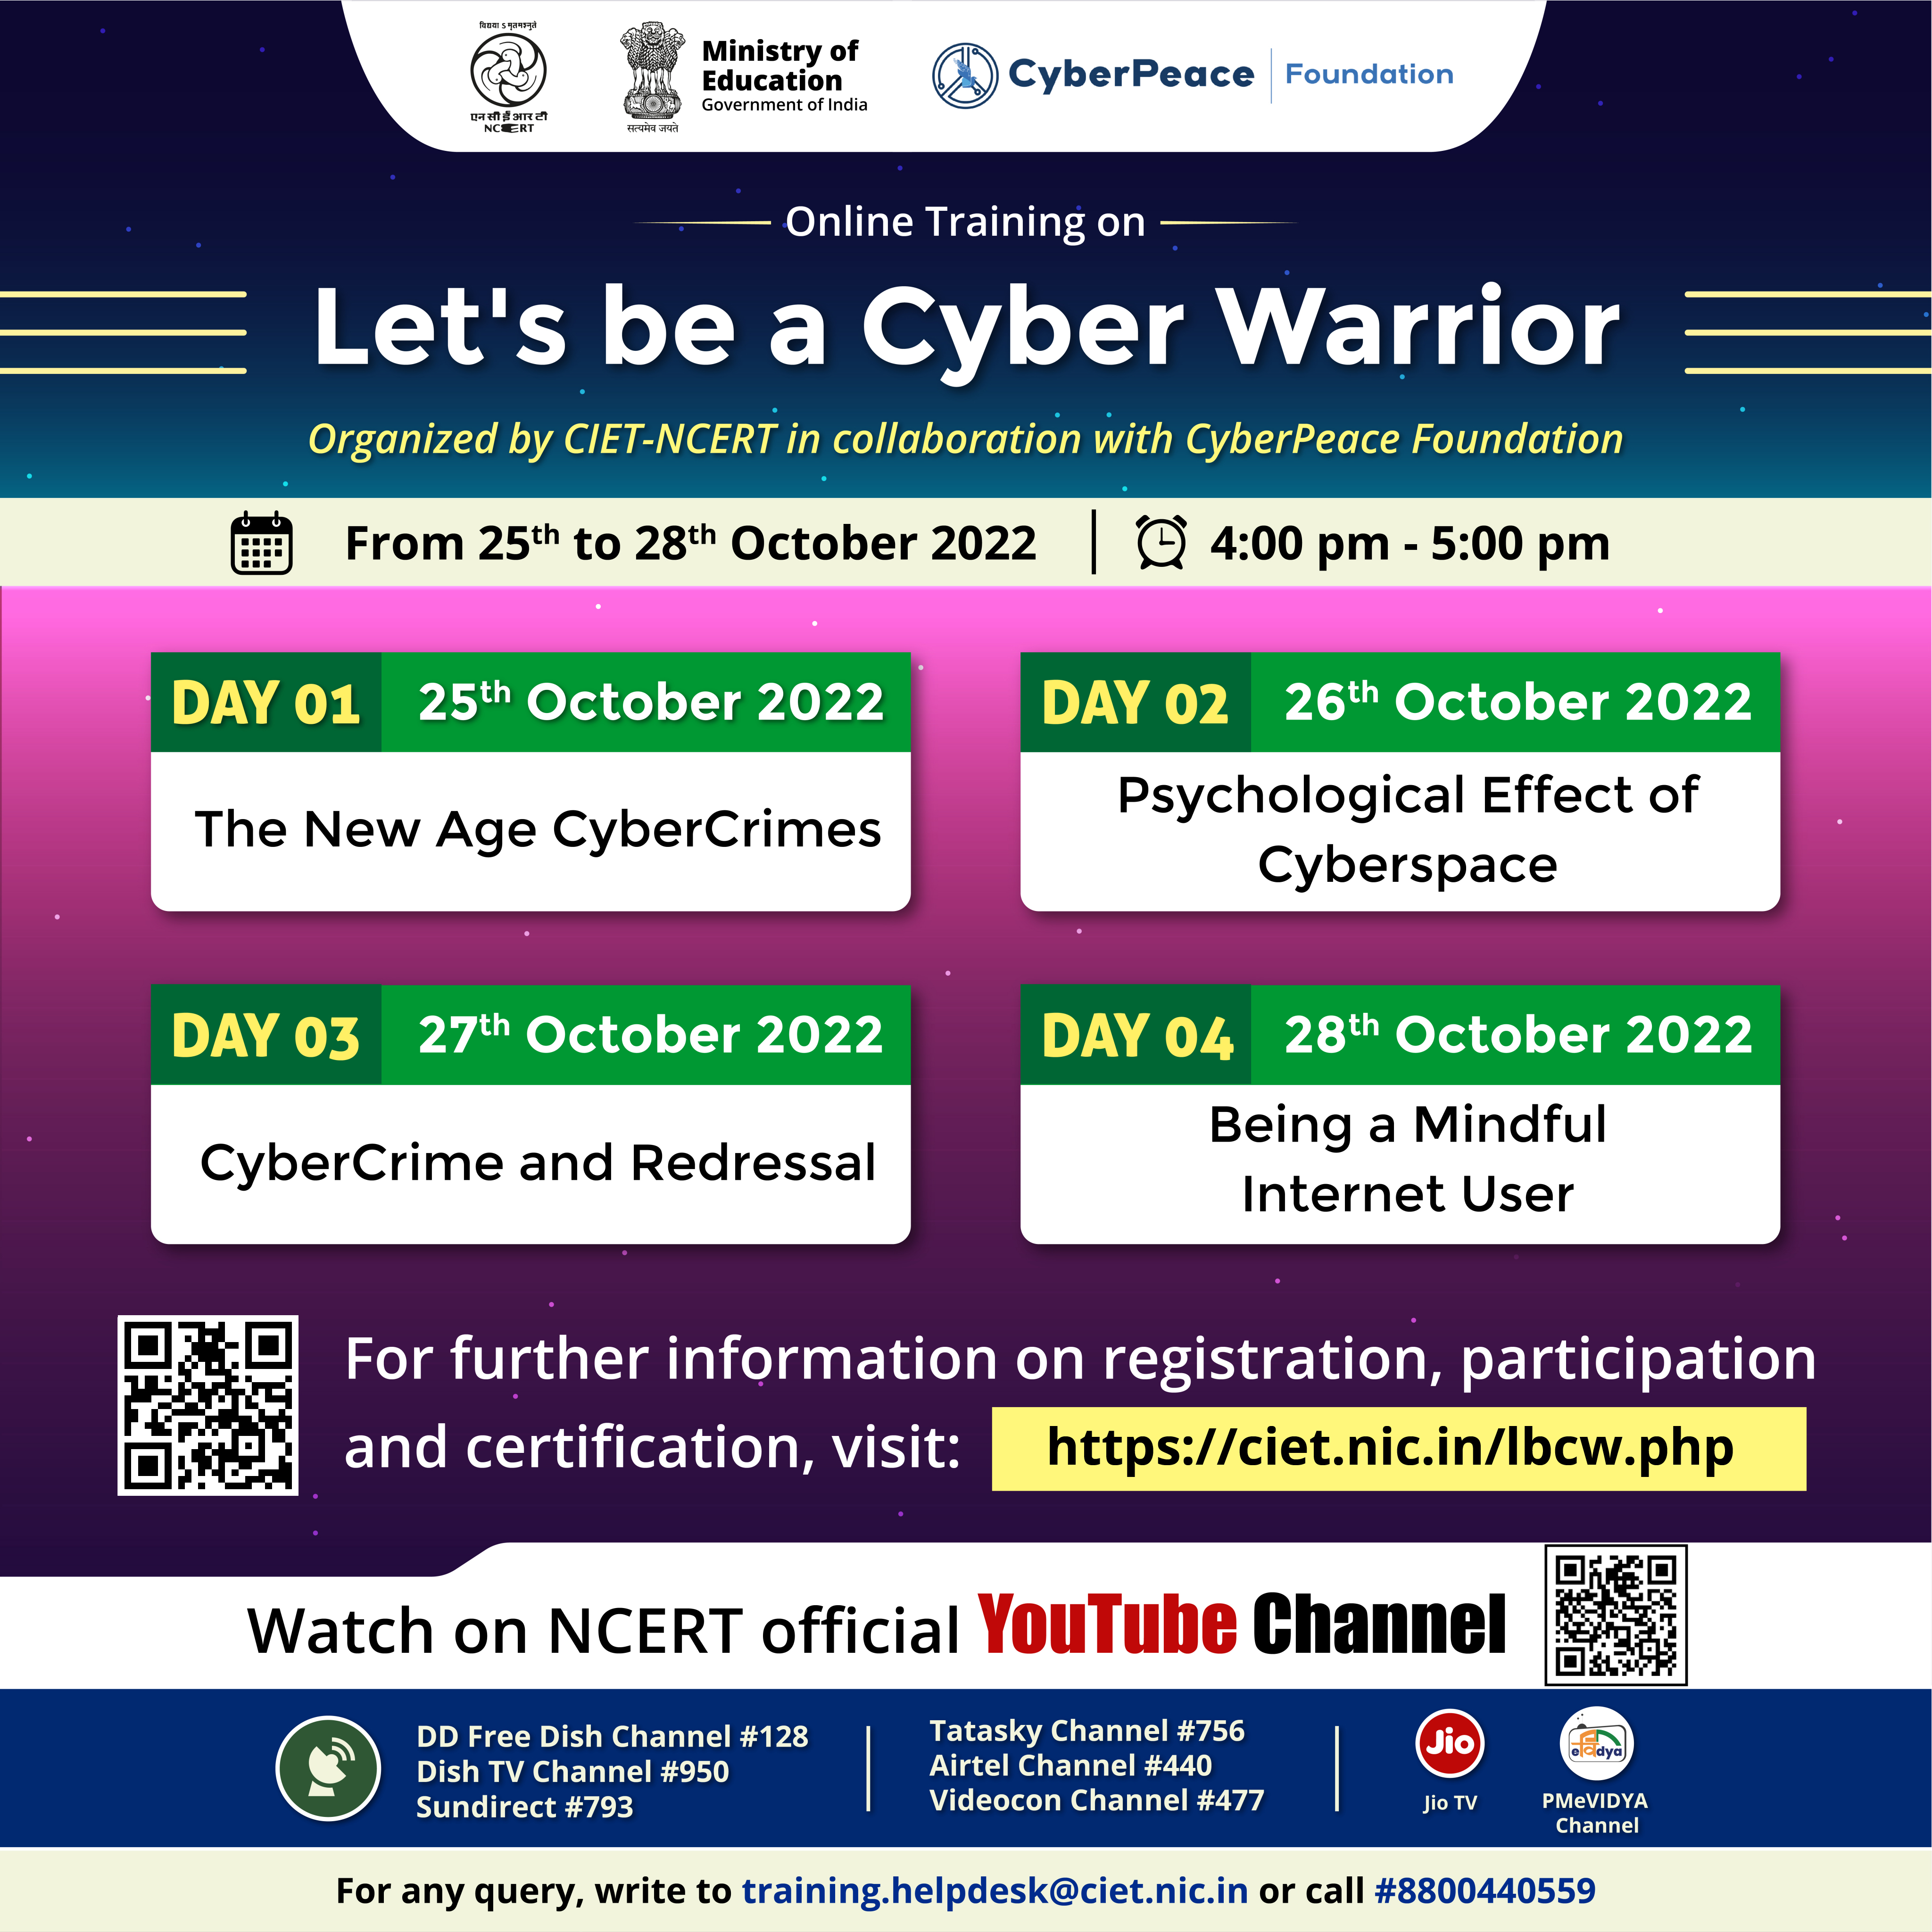 Online Training on Let's be a Cyber Warrior Image